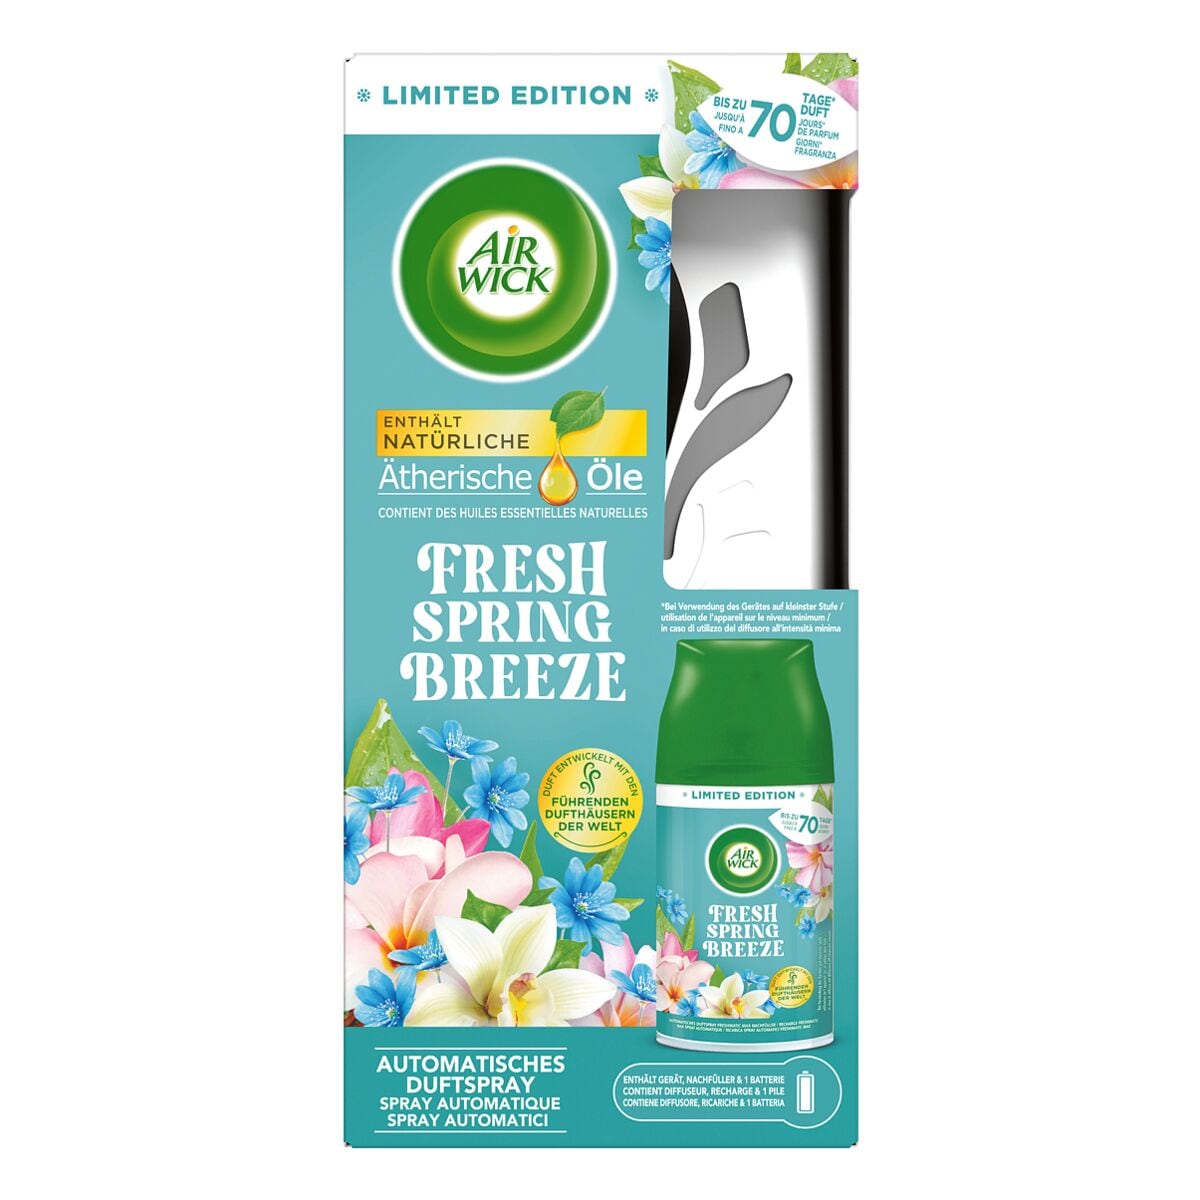 AIR WICK Duftspray Starter-Set Freshmatic Max Fresh Spring Breeze Limited Edition